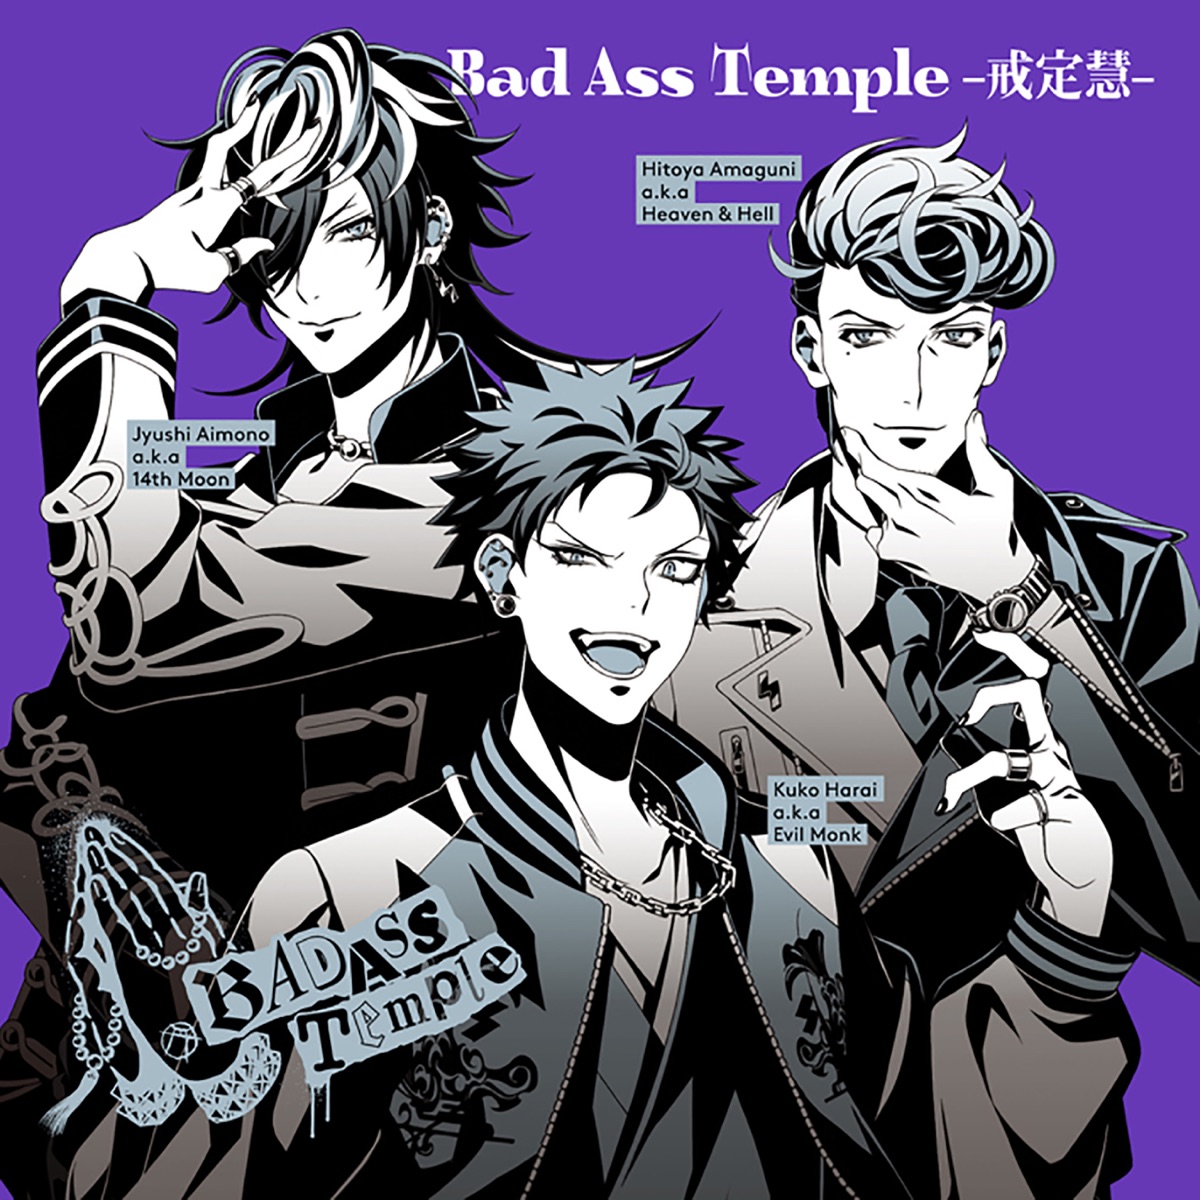 Cover art for『Hitoya Amaguni (Eiji Takeuchi) - If I Follow My Heart』from the release『Bad Ass Temple -Kaijoue-